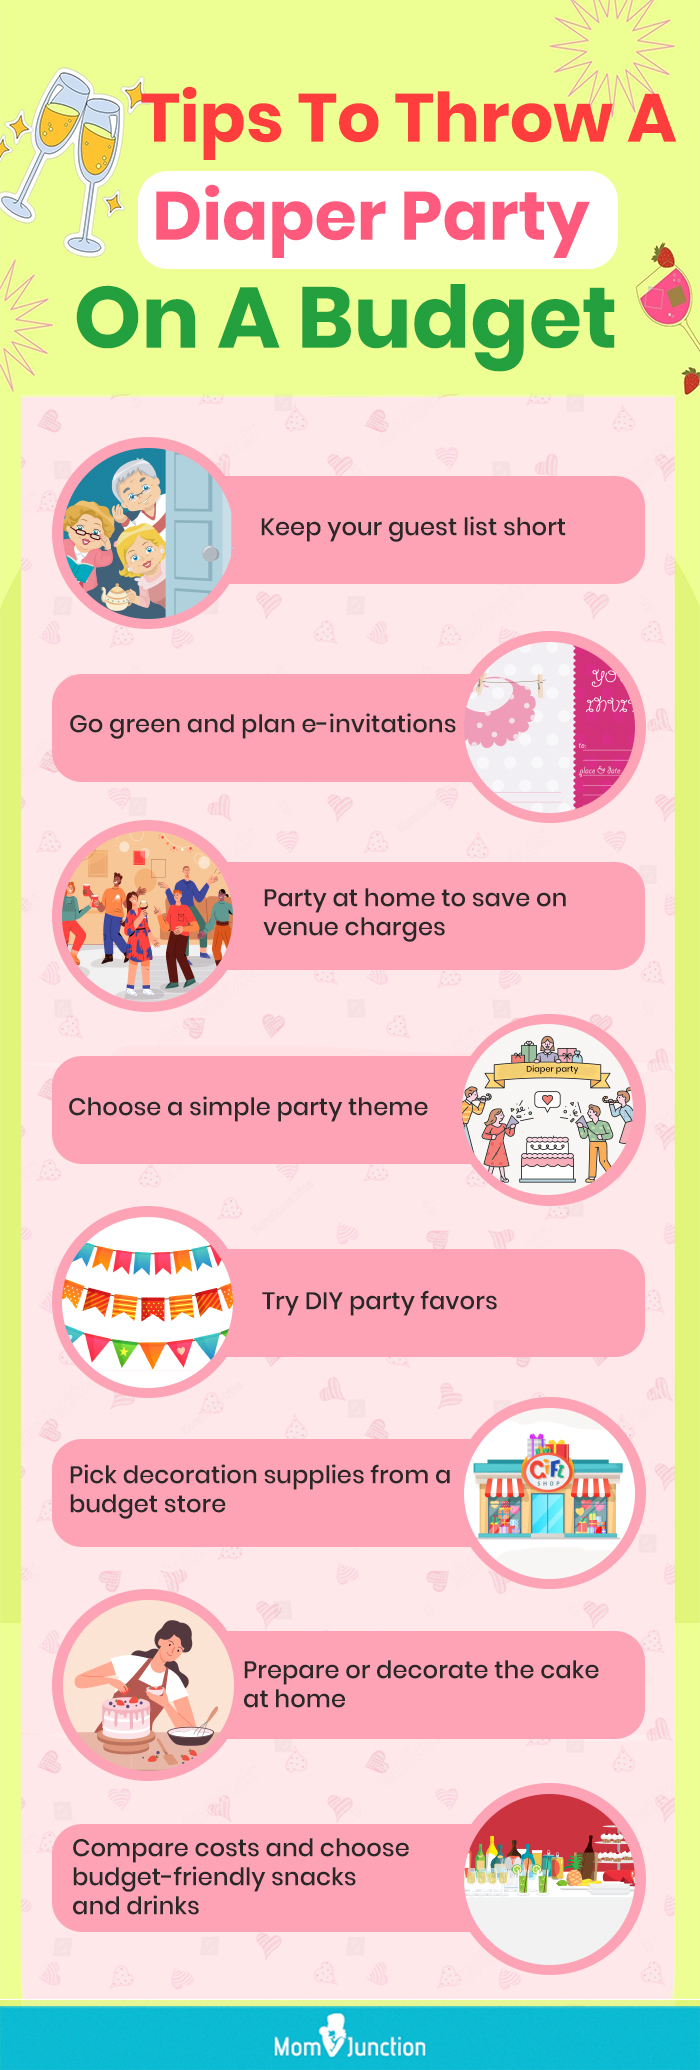 tips to throw a diaper party on a budget [infographic]